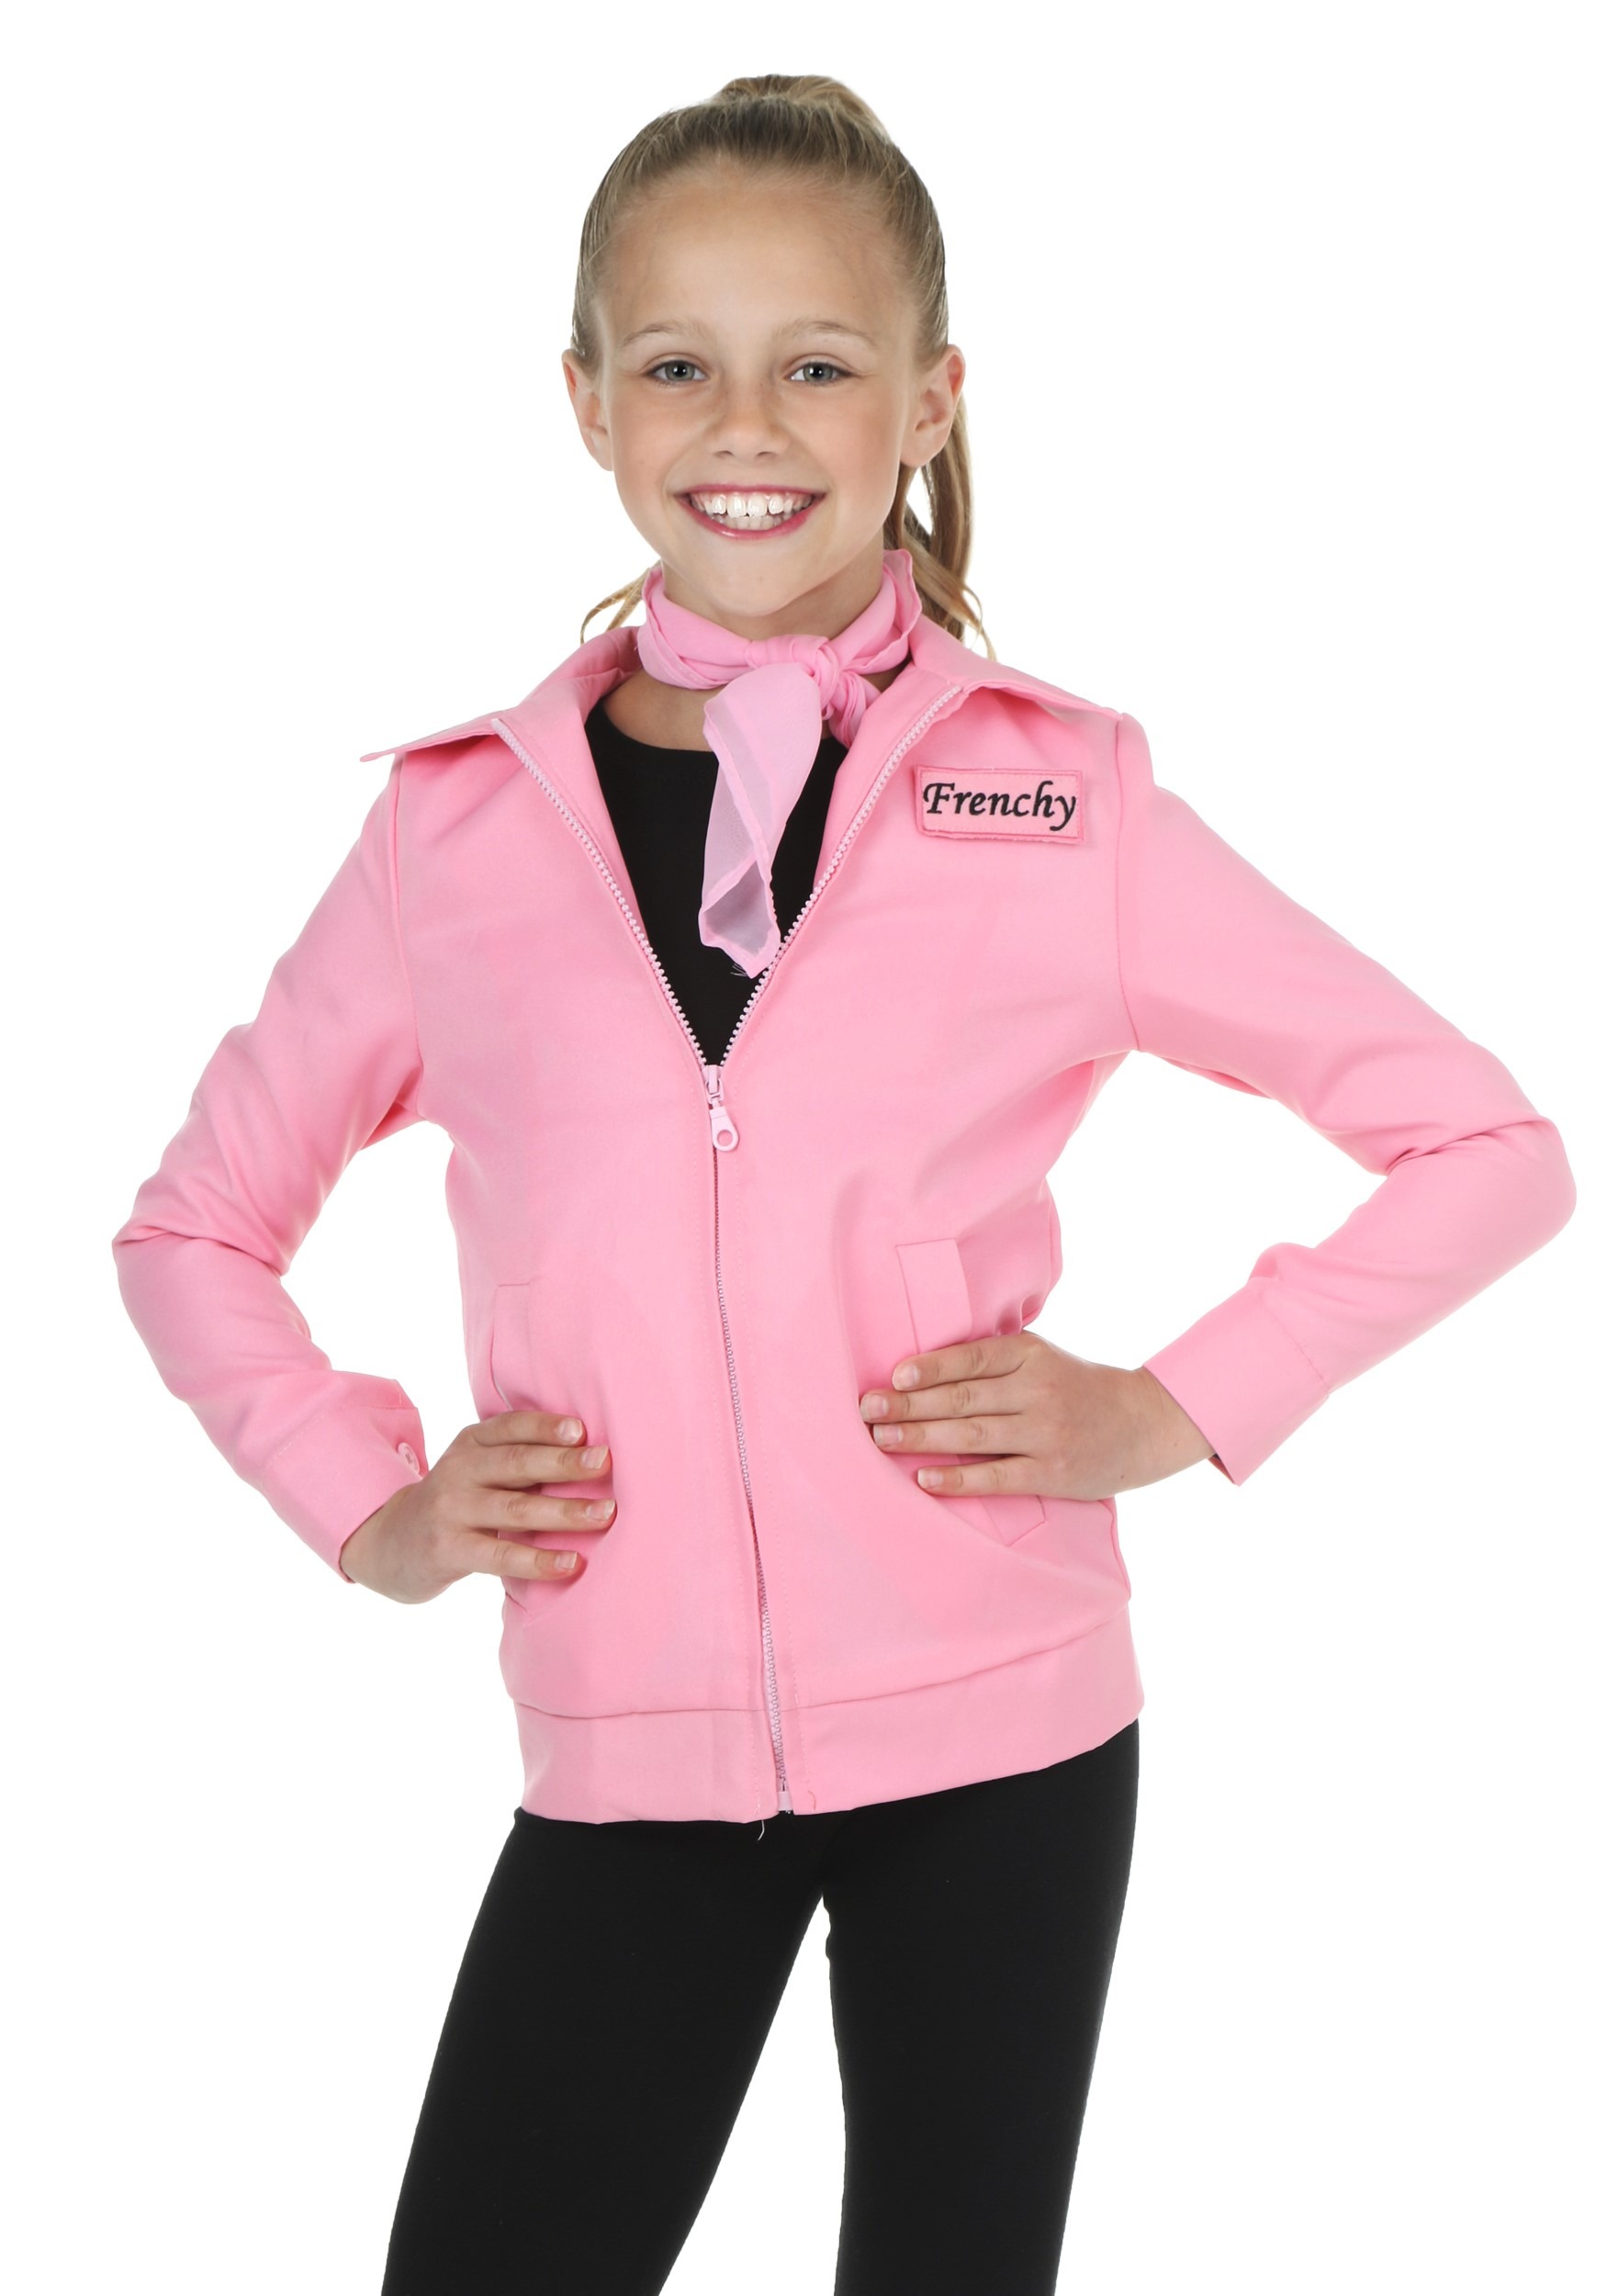 Photos - Fancy Dress FUN Costumes Child Authentic Pink Ladies Jacket Costume | Grease Costumes